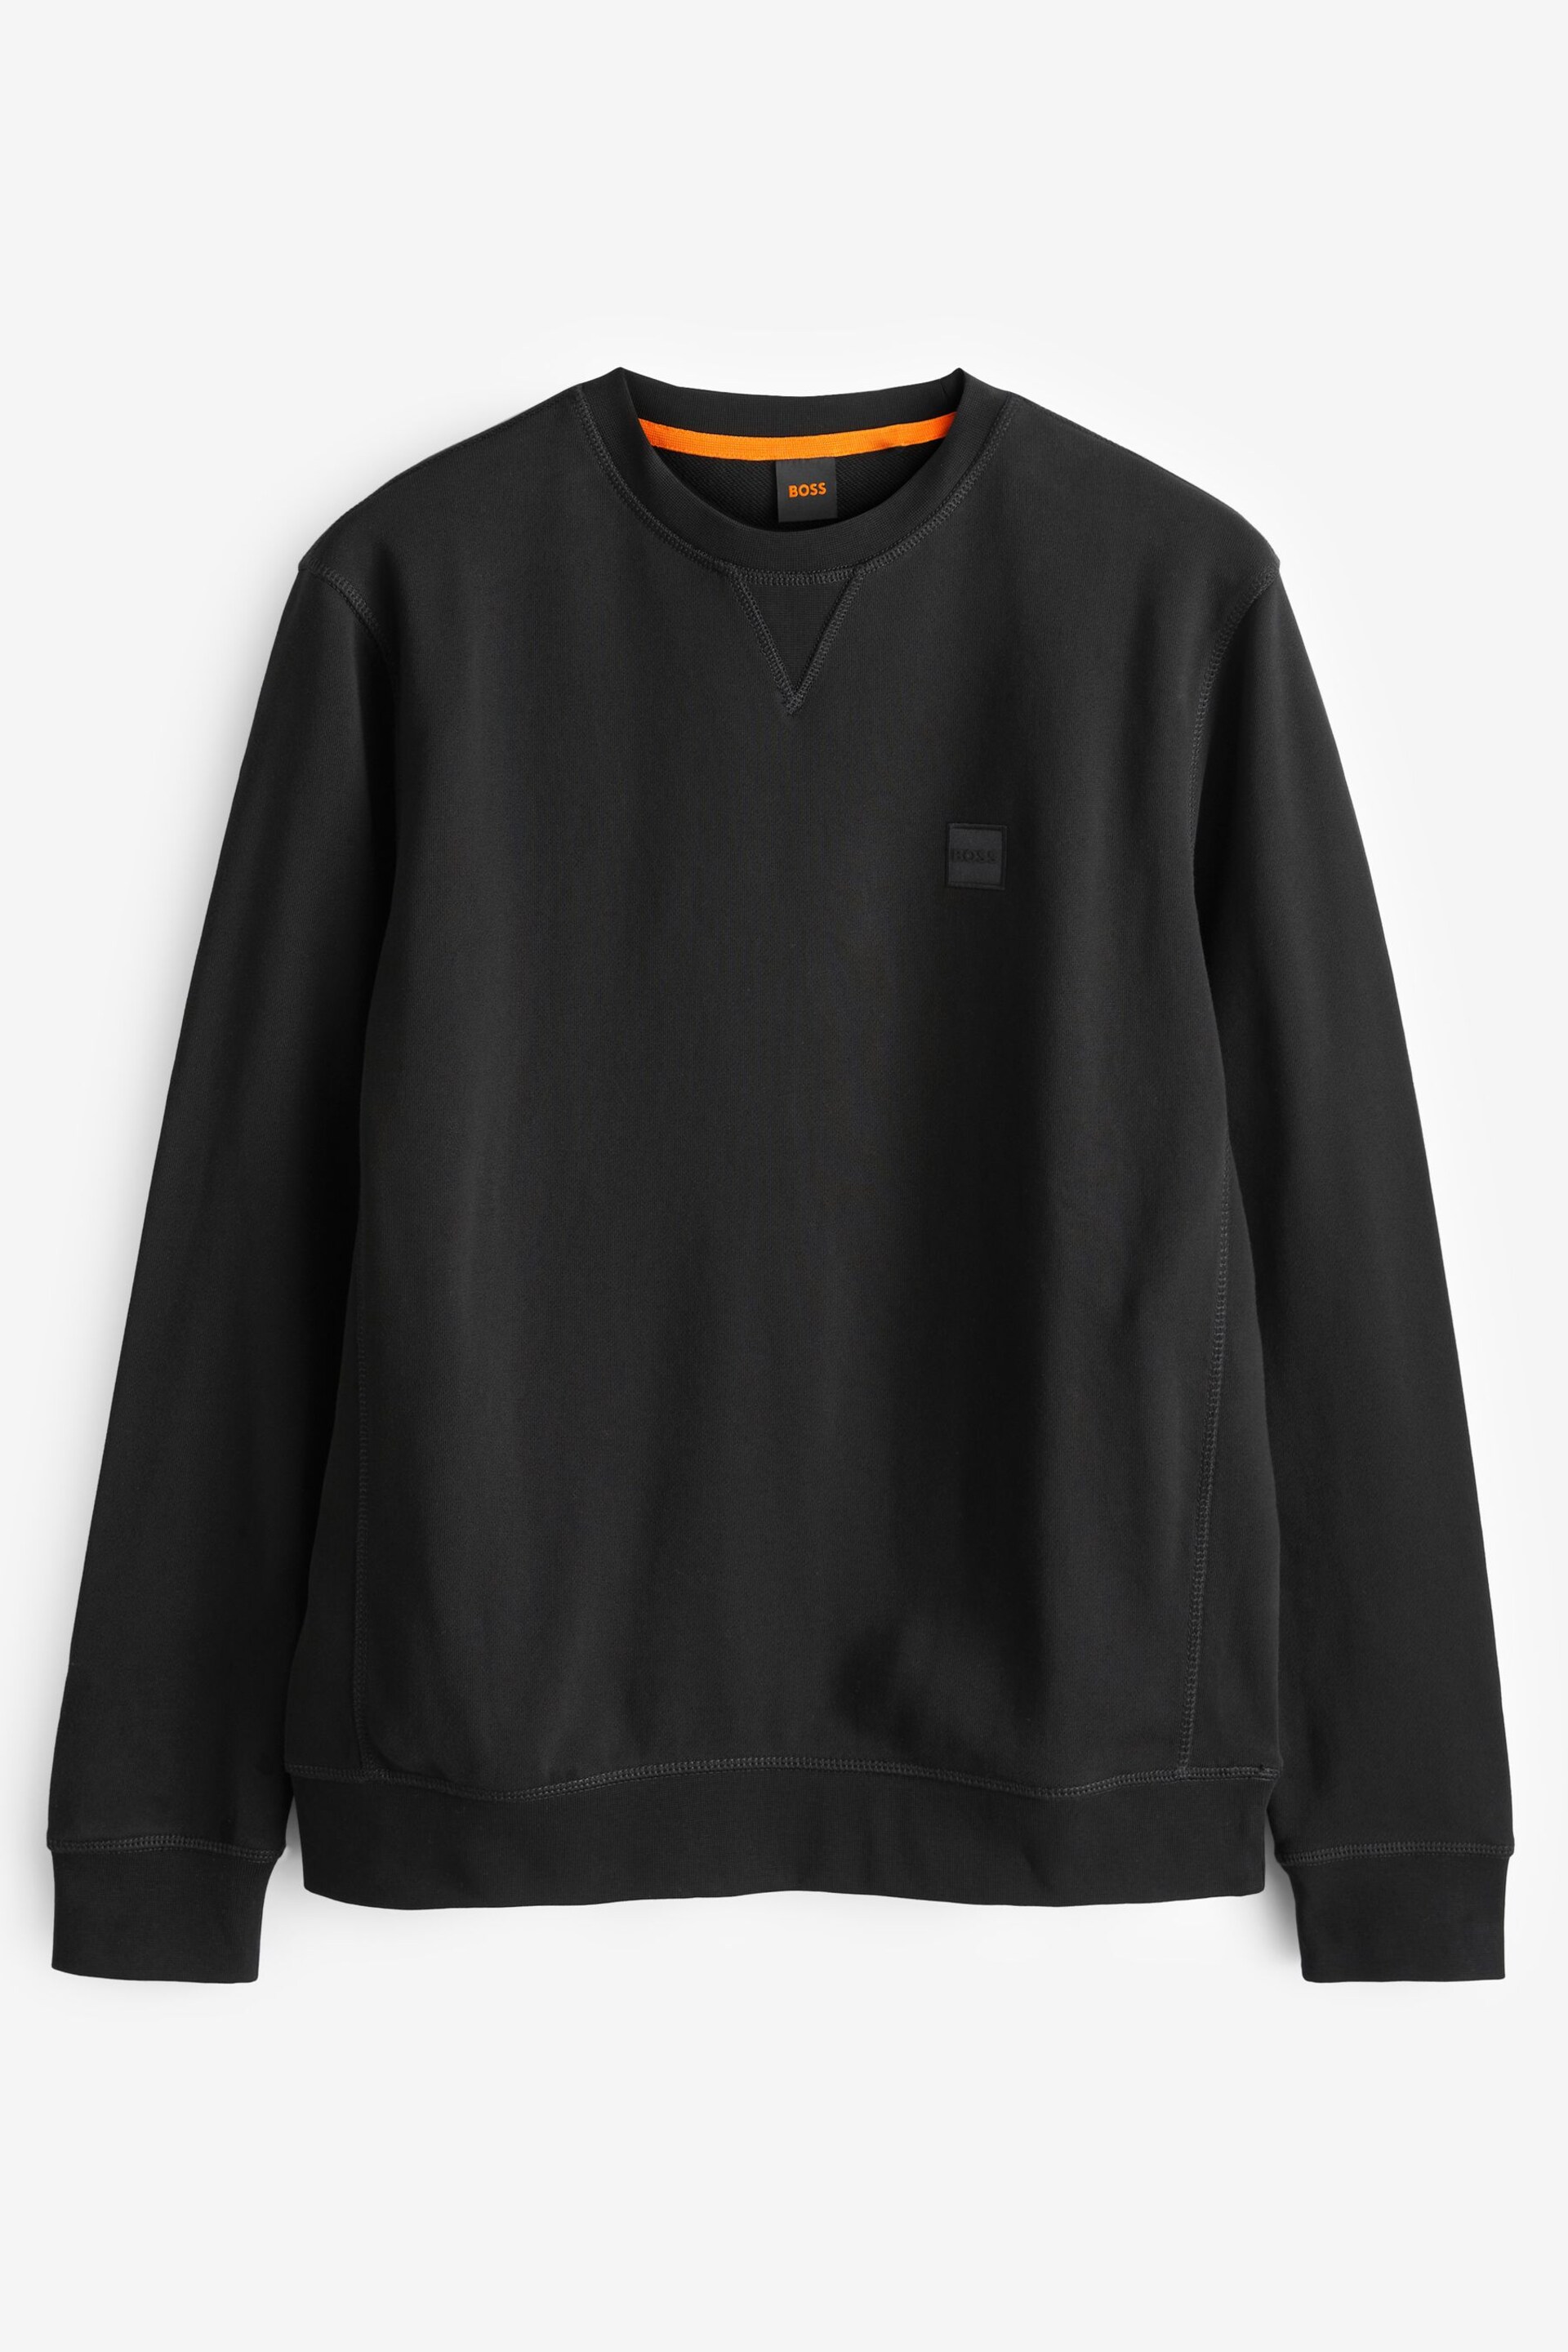 BOSS Black Cotton Terry Relaxed Fit Sweatshirt - Image 5 of 5